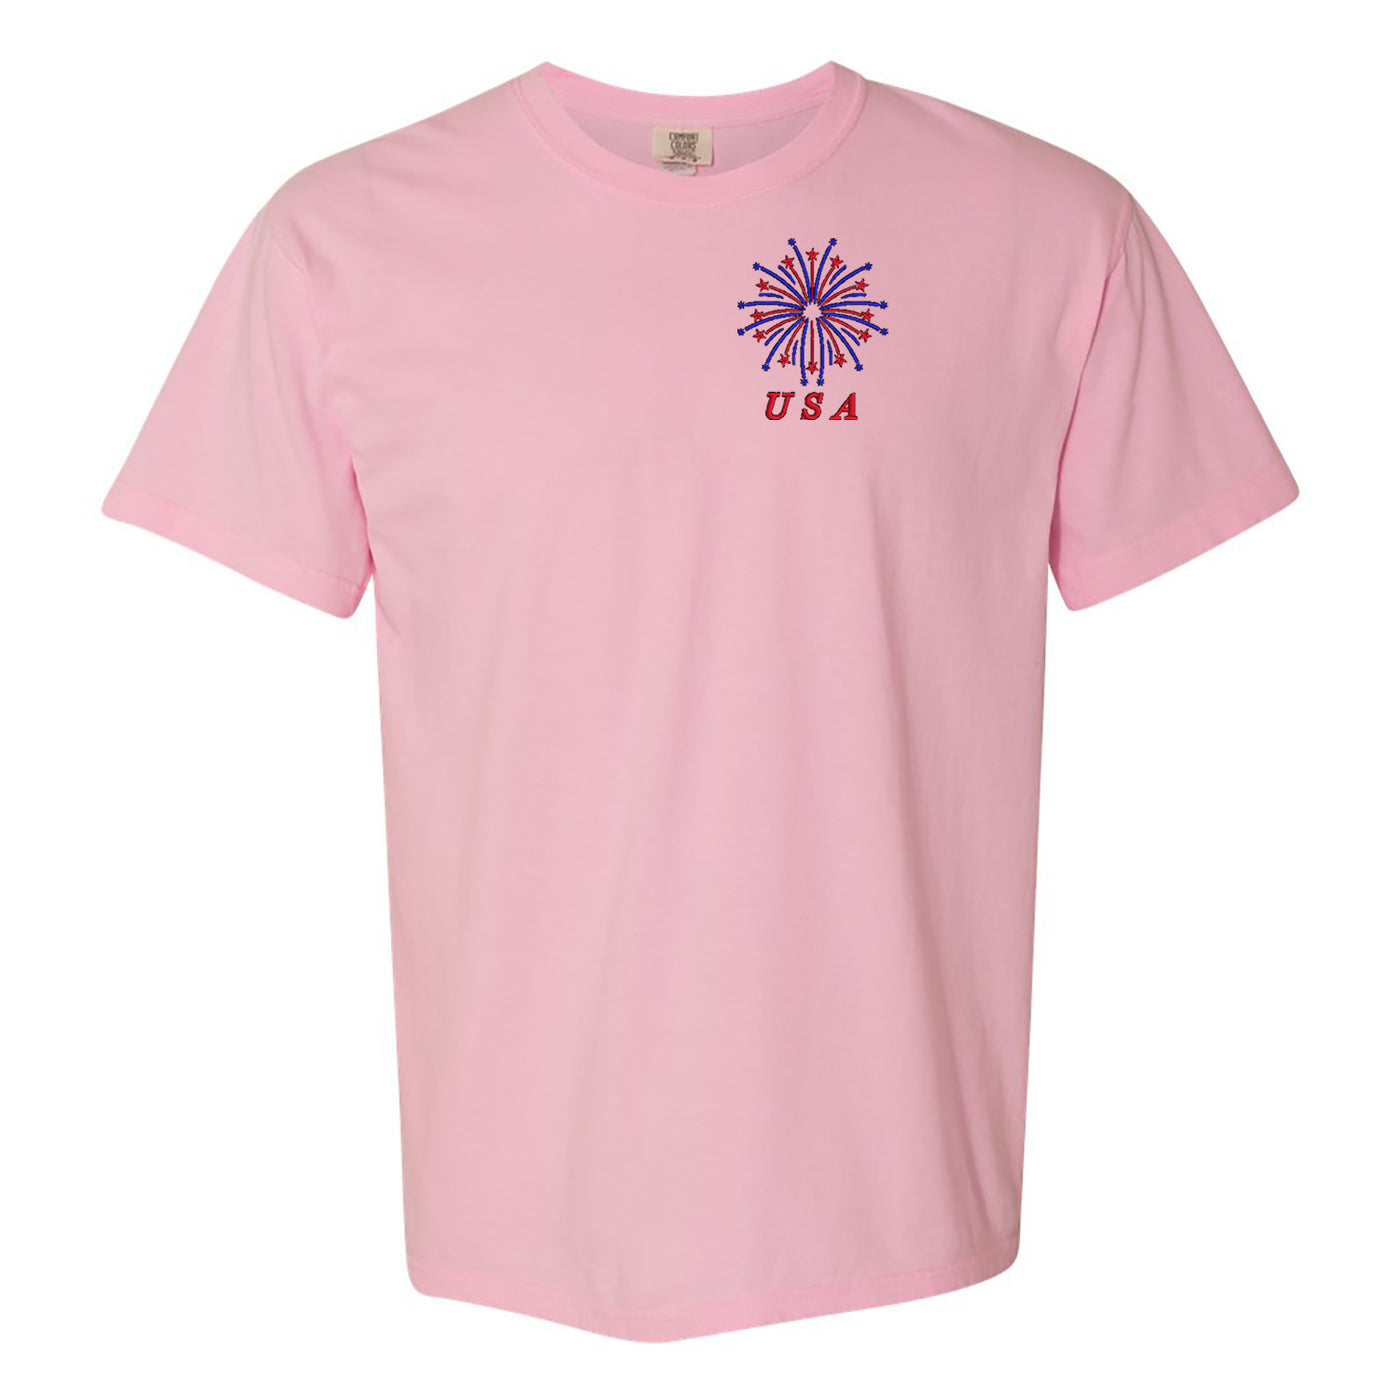 Make It Yours™ 'Firework' Comfort Colors T-Shirt